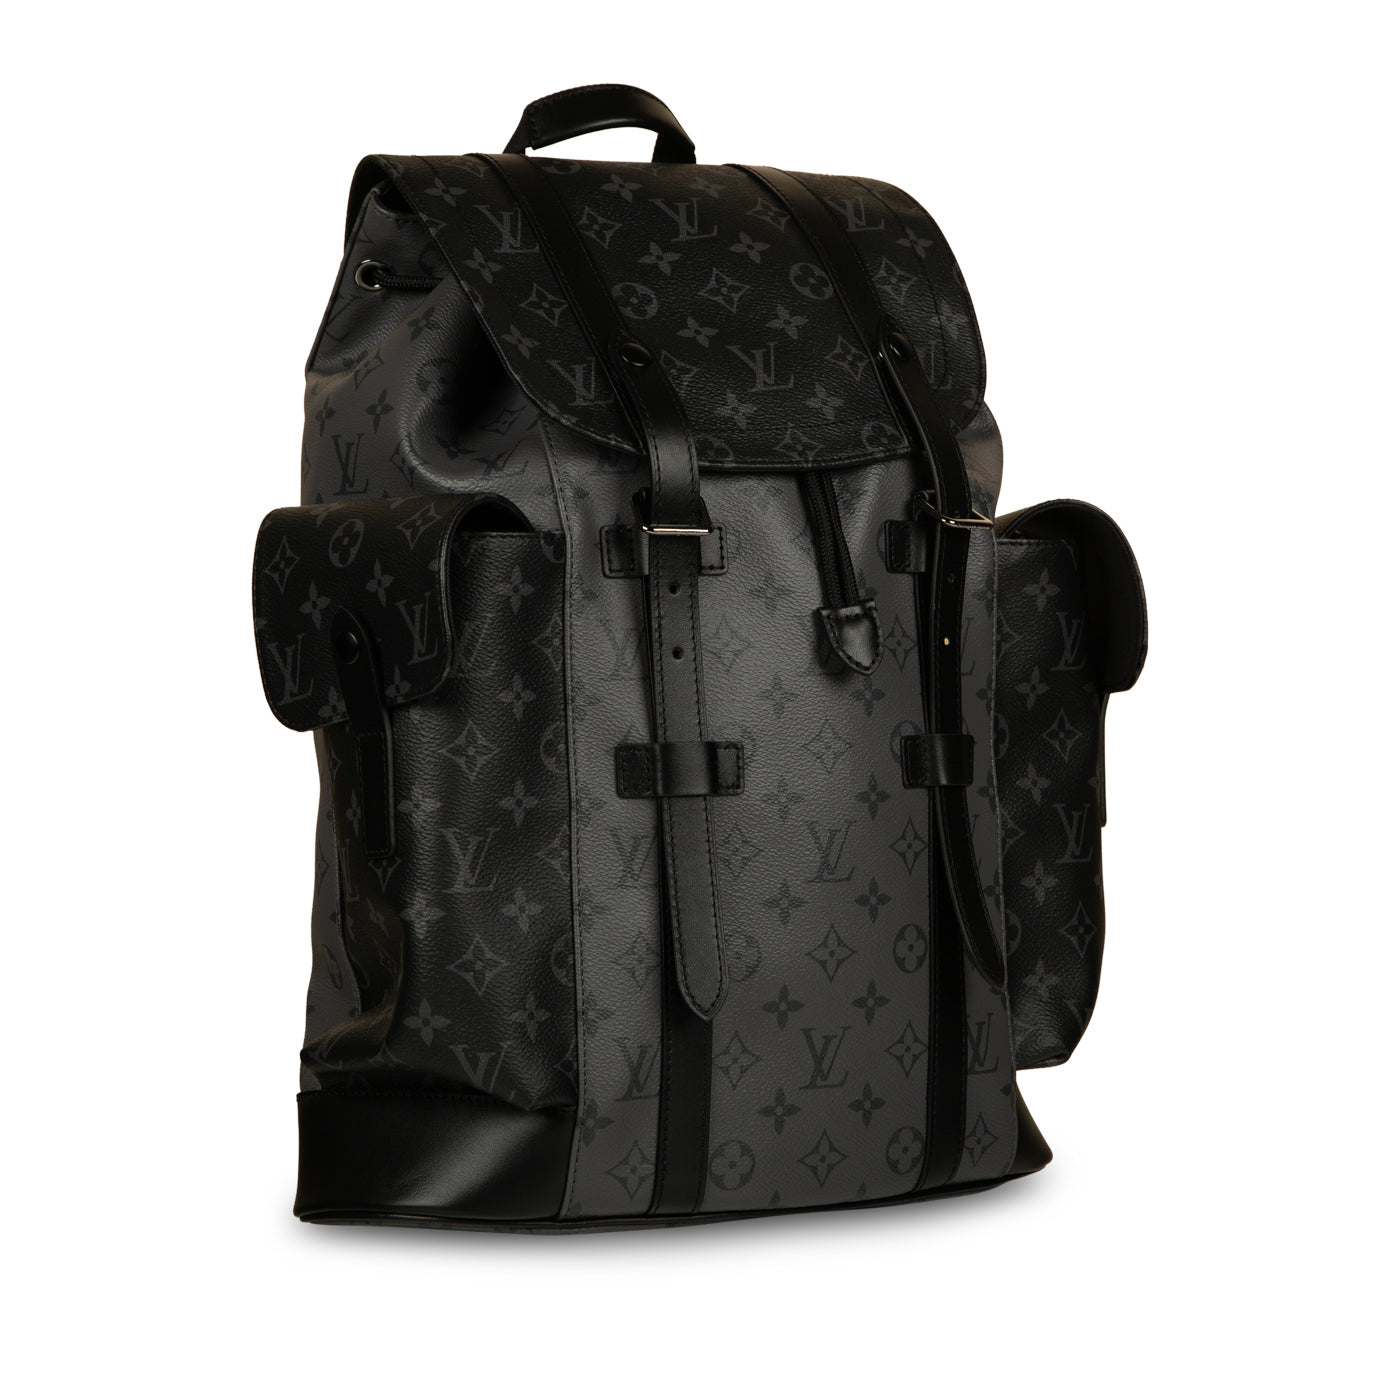 Christopher backpack leather bag Louis Vuitton Black in Leather - 34695577